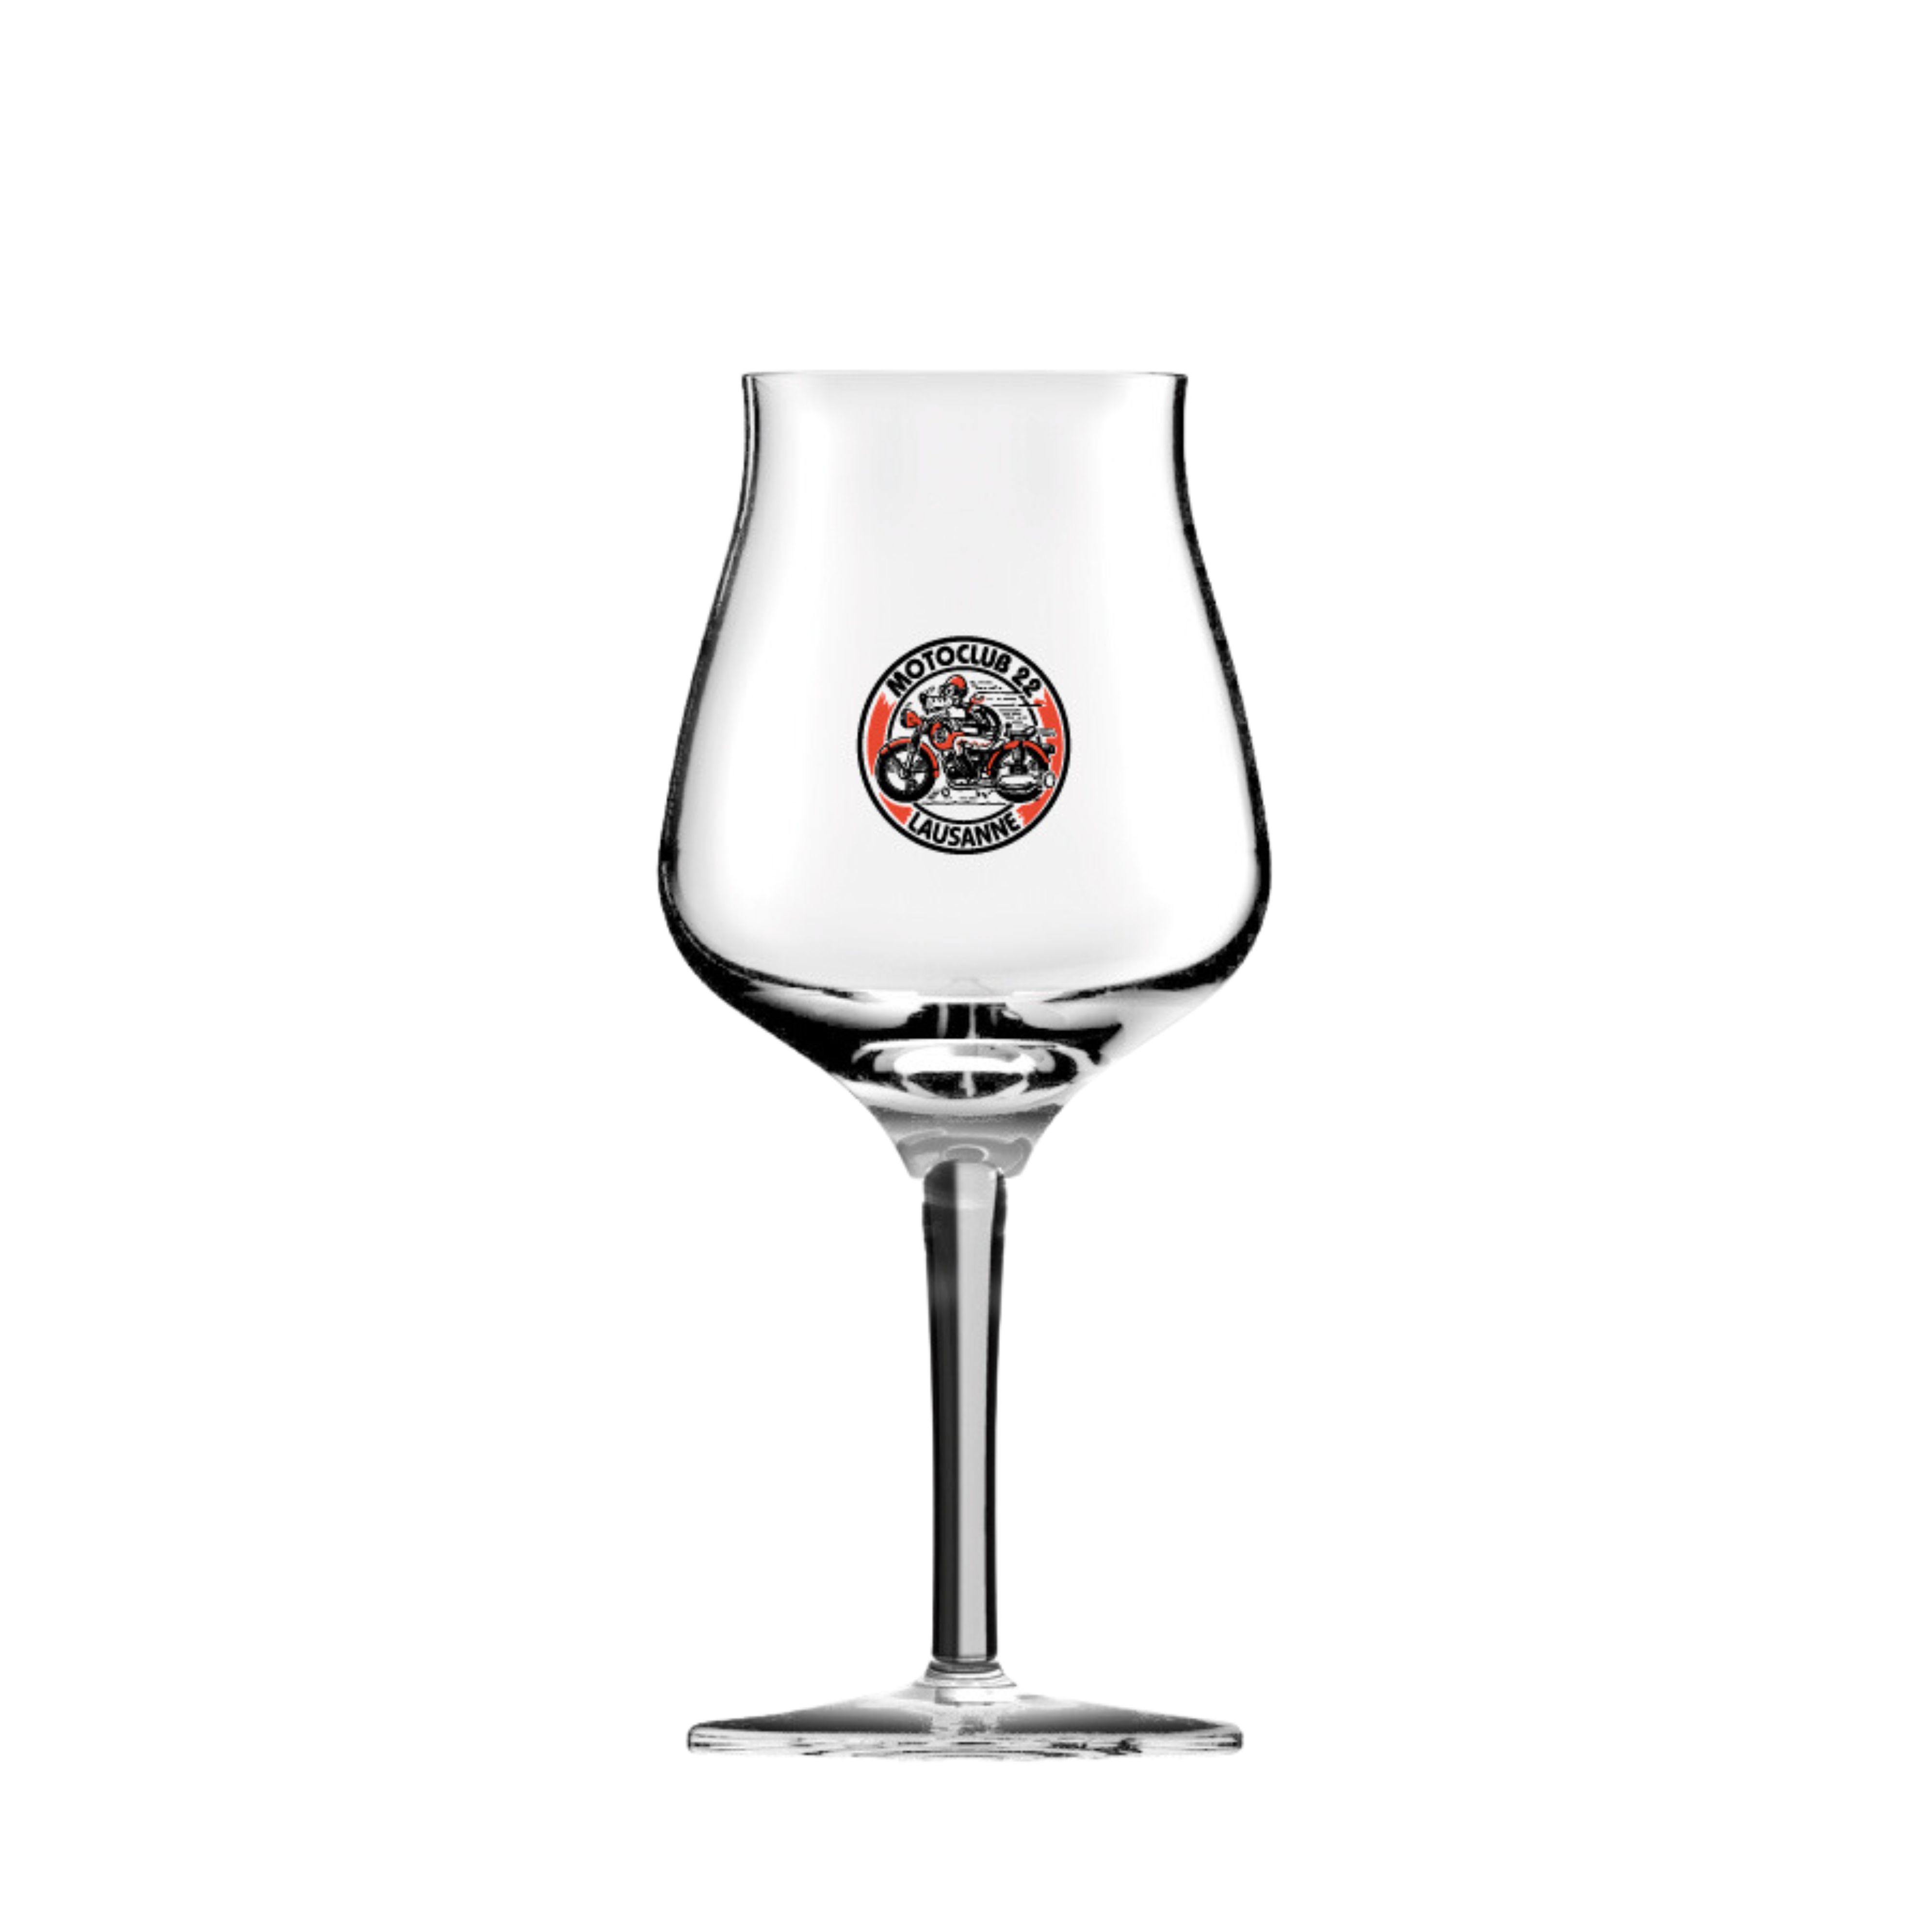 Personalised tulip glass with orange and black graphic design from motoclub.